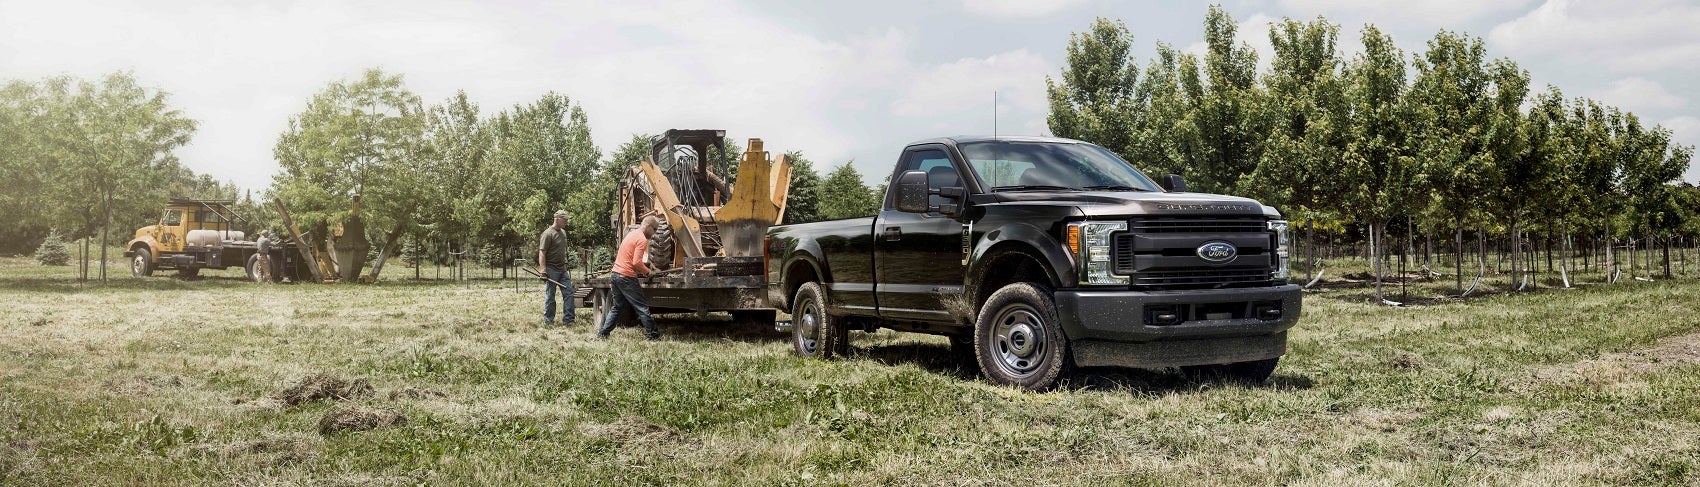 2021 Ford F-350 Review Sumner WA